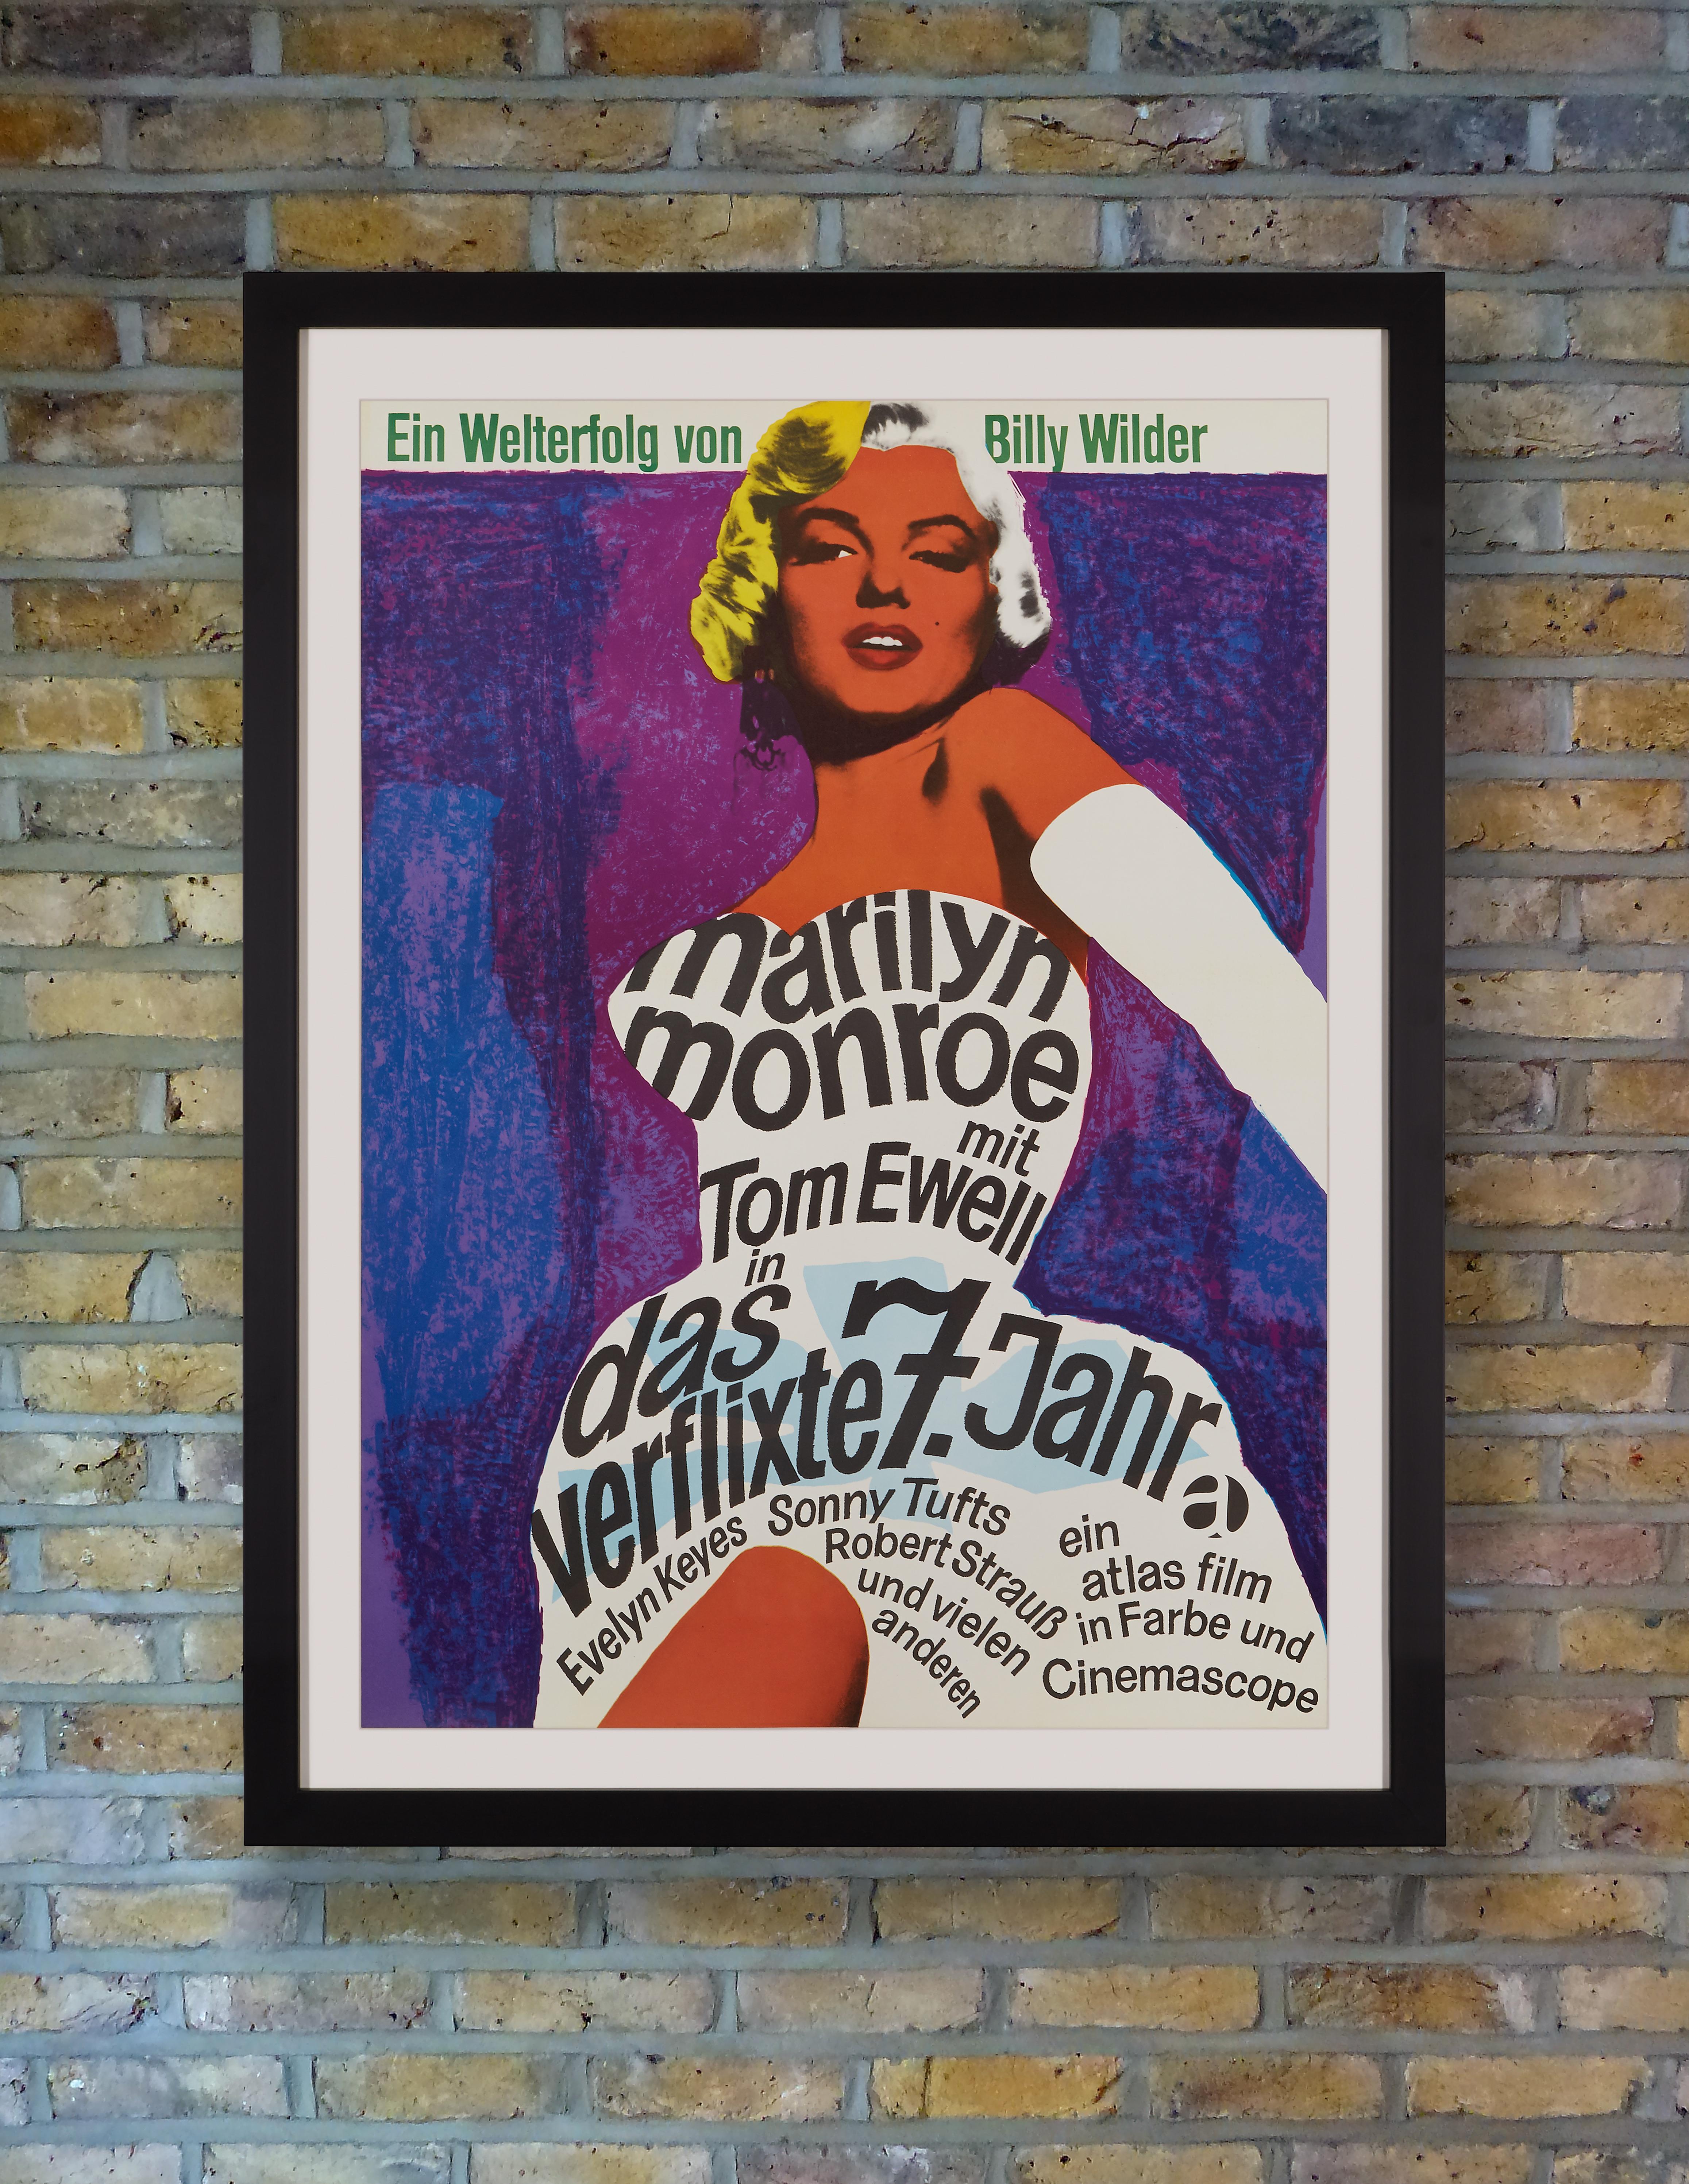 Graphic designer Dorothea Fischer Nosbisch's stunningly vibrant artwork for the 1966 German re-release of 'The Seven Year Itch' has made this a highly sought after poster among collectors. The bold title and credits are incorporated into the